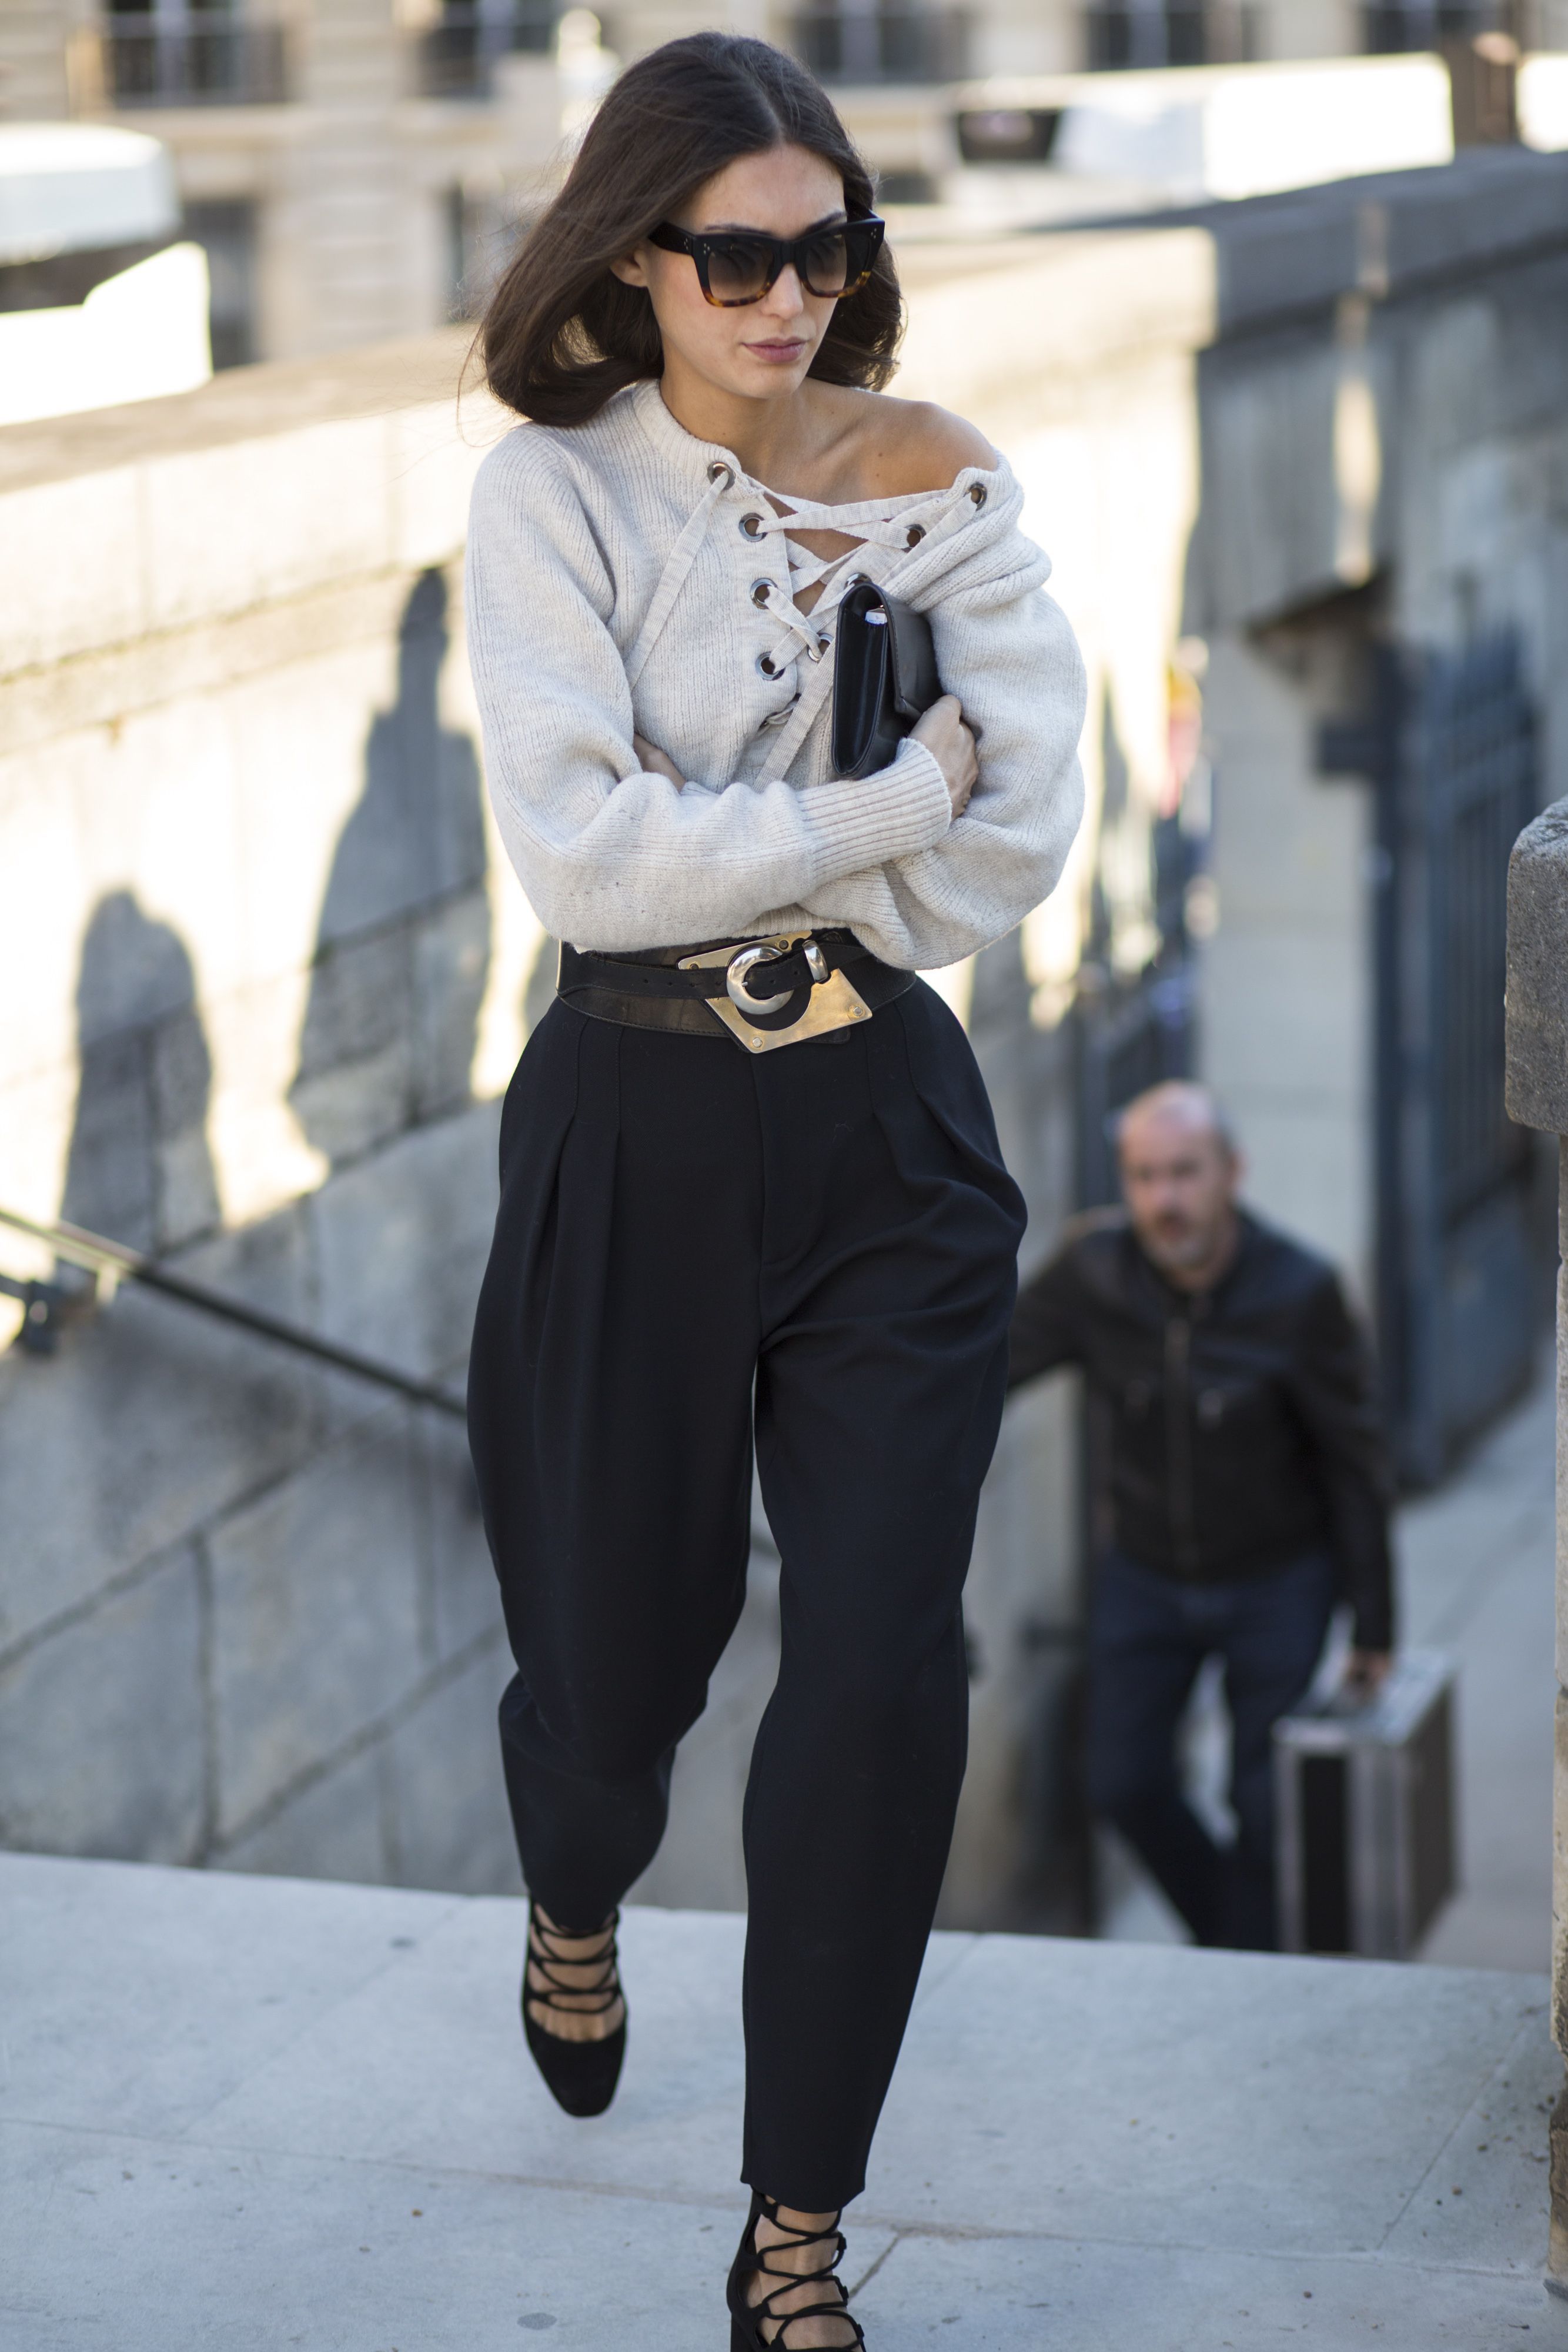 Weve selected the most coveted Paris street style, fresh from the SS16 shows.